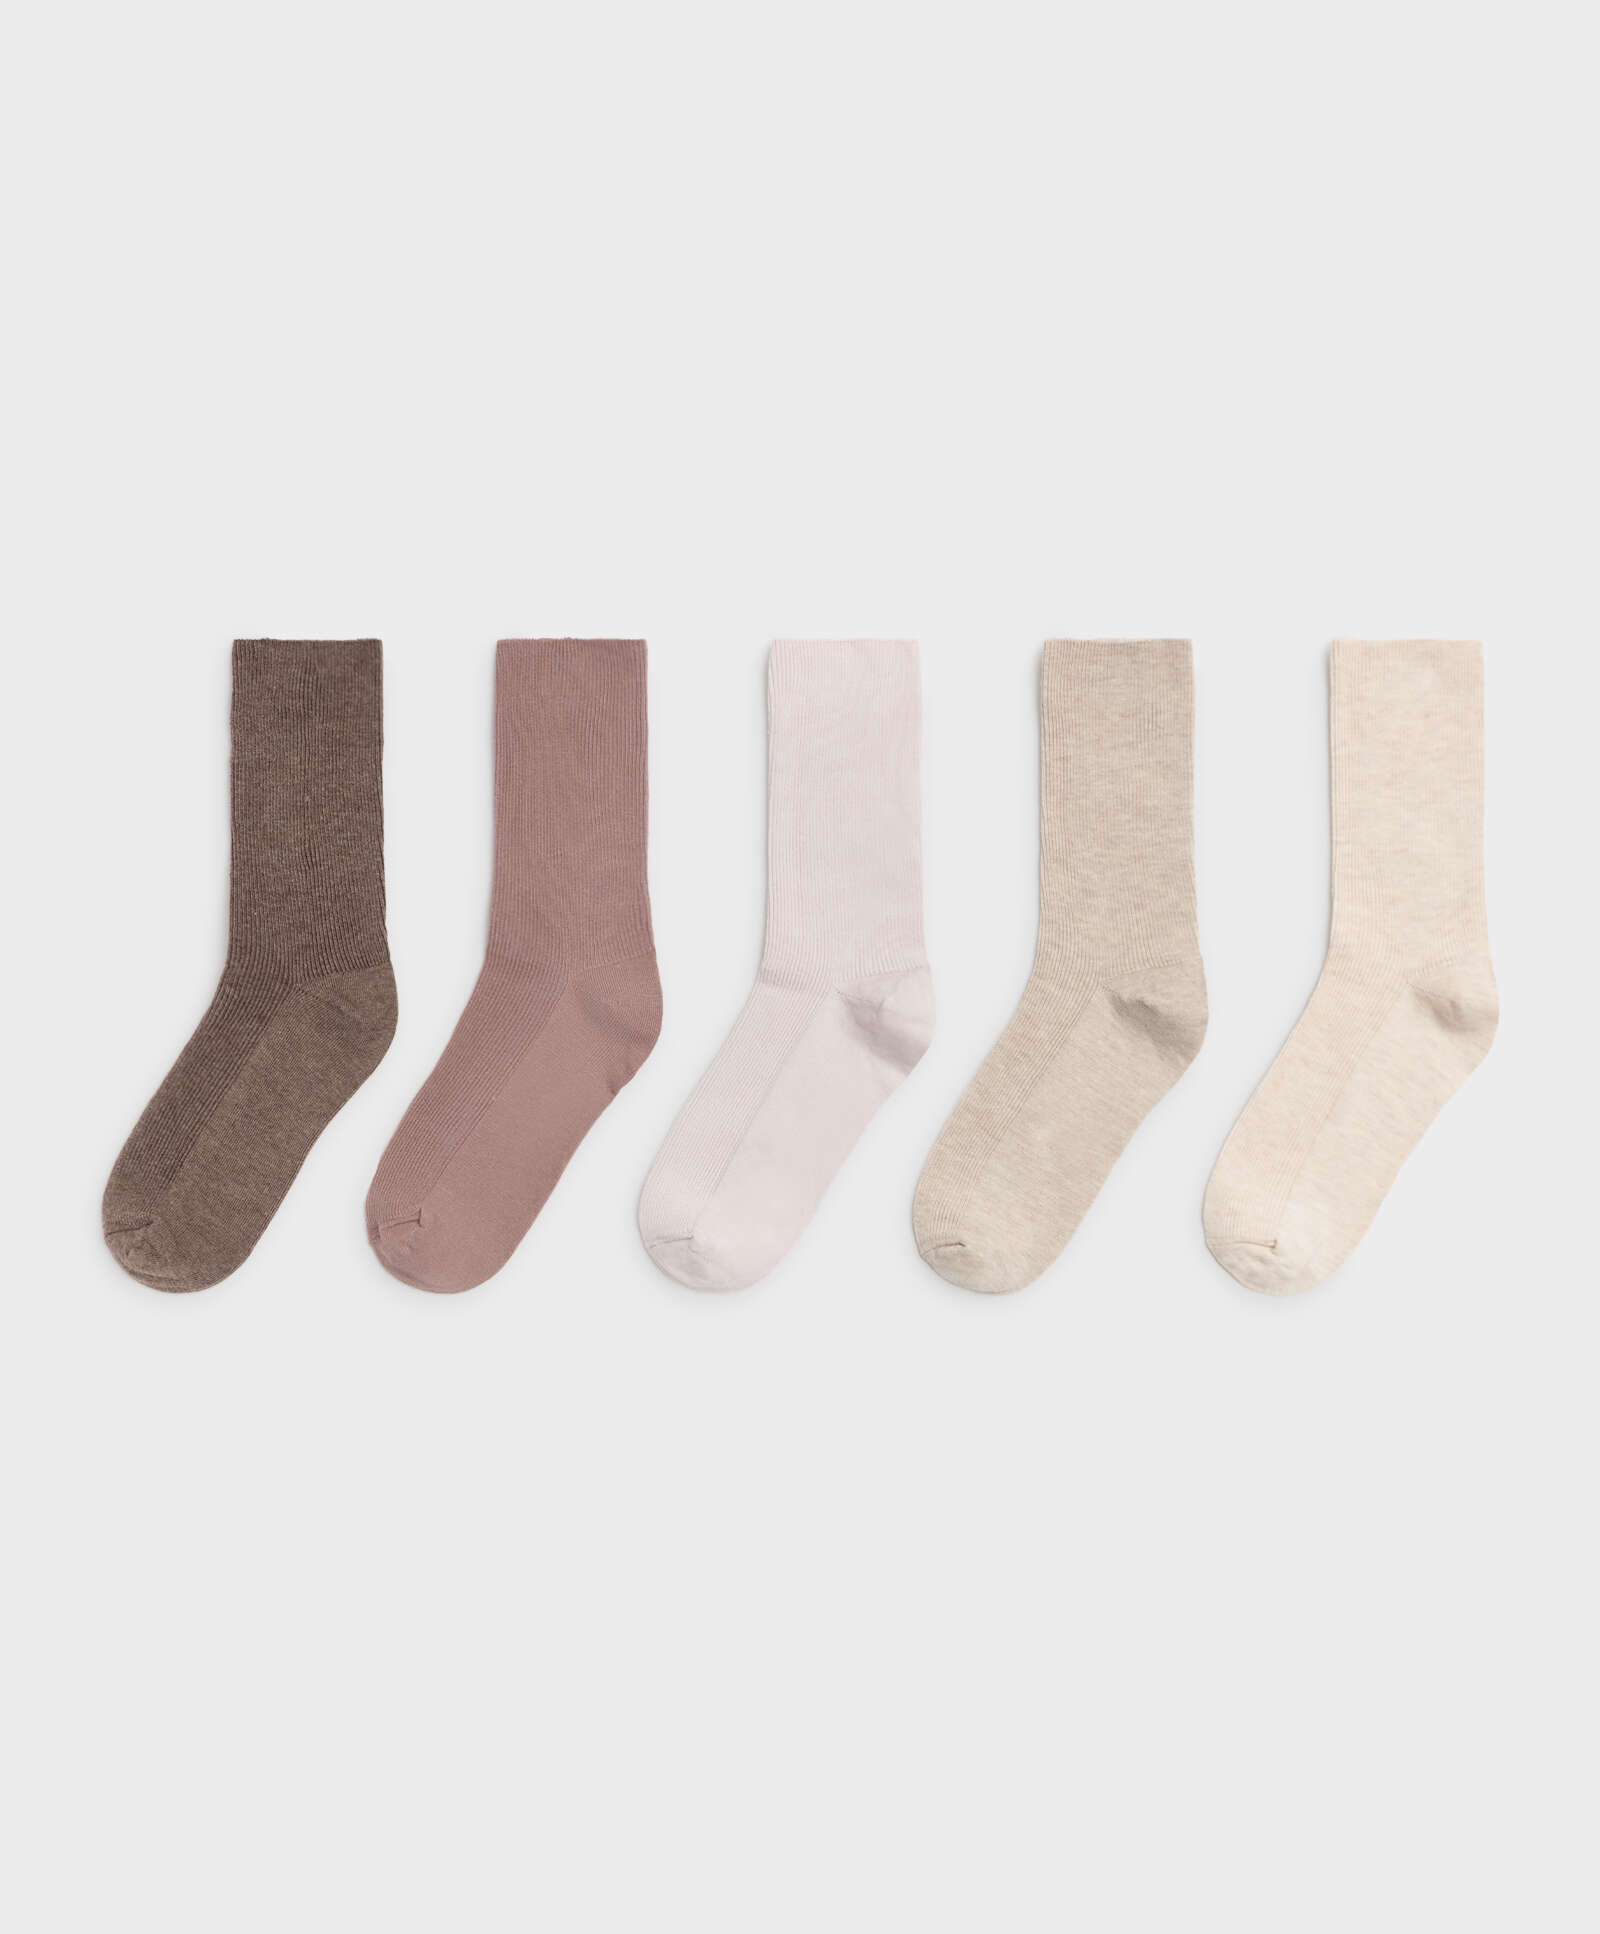 5 pairs of ribbed cotton socks